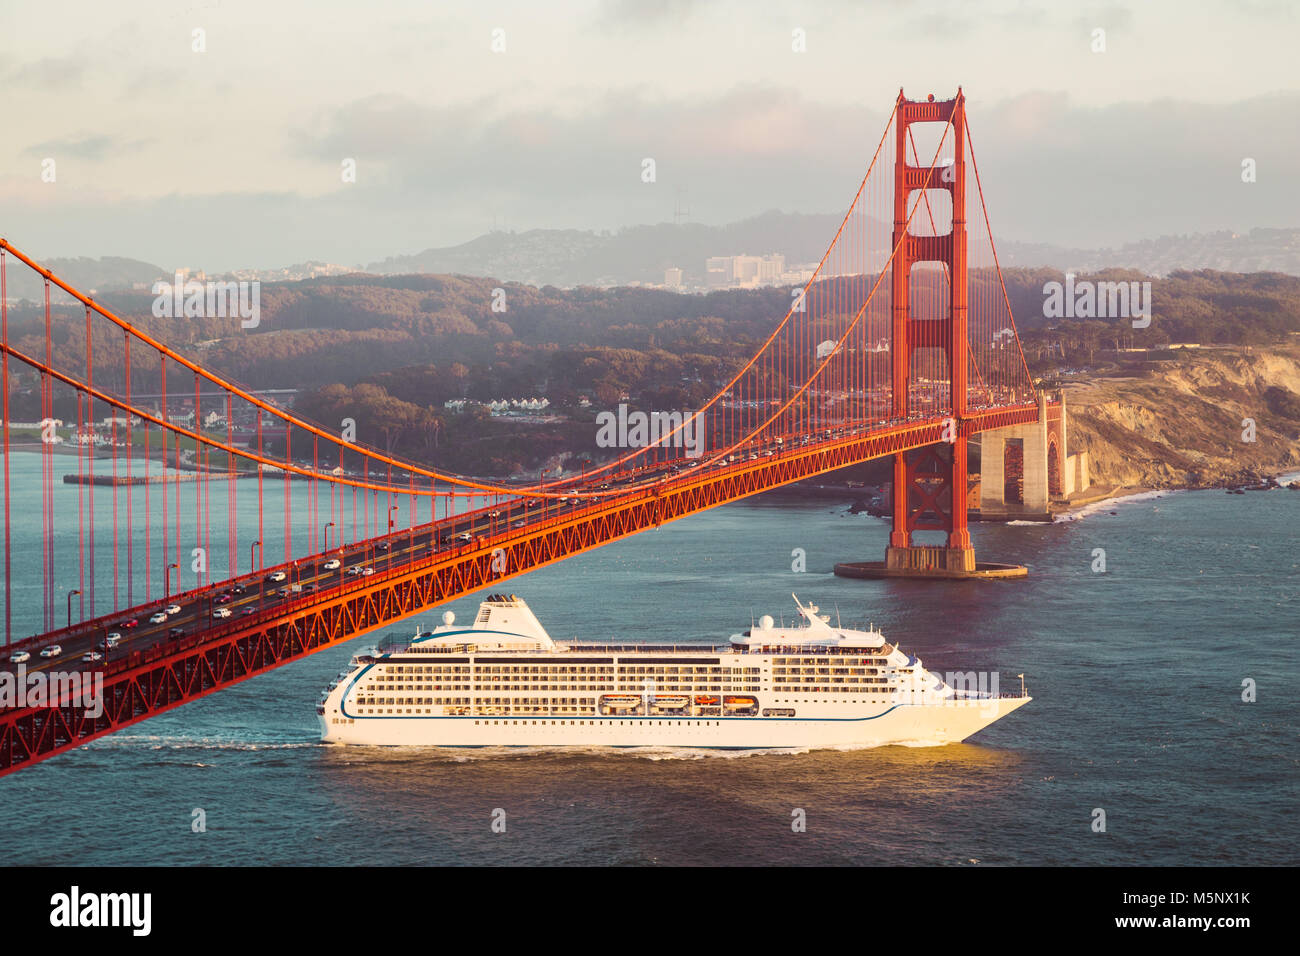 Cruise ship passing famous Golden Gate Bridge with the skyline of San Francisco in the background in golden evening light at sunset, California, USA Stock Photo